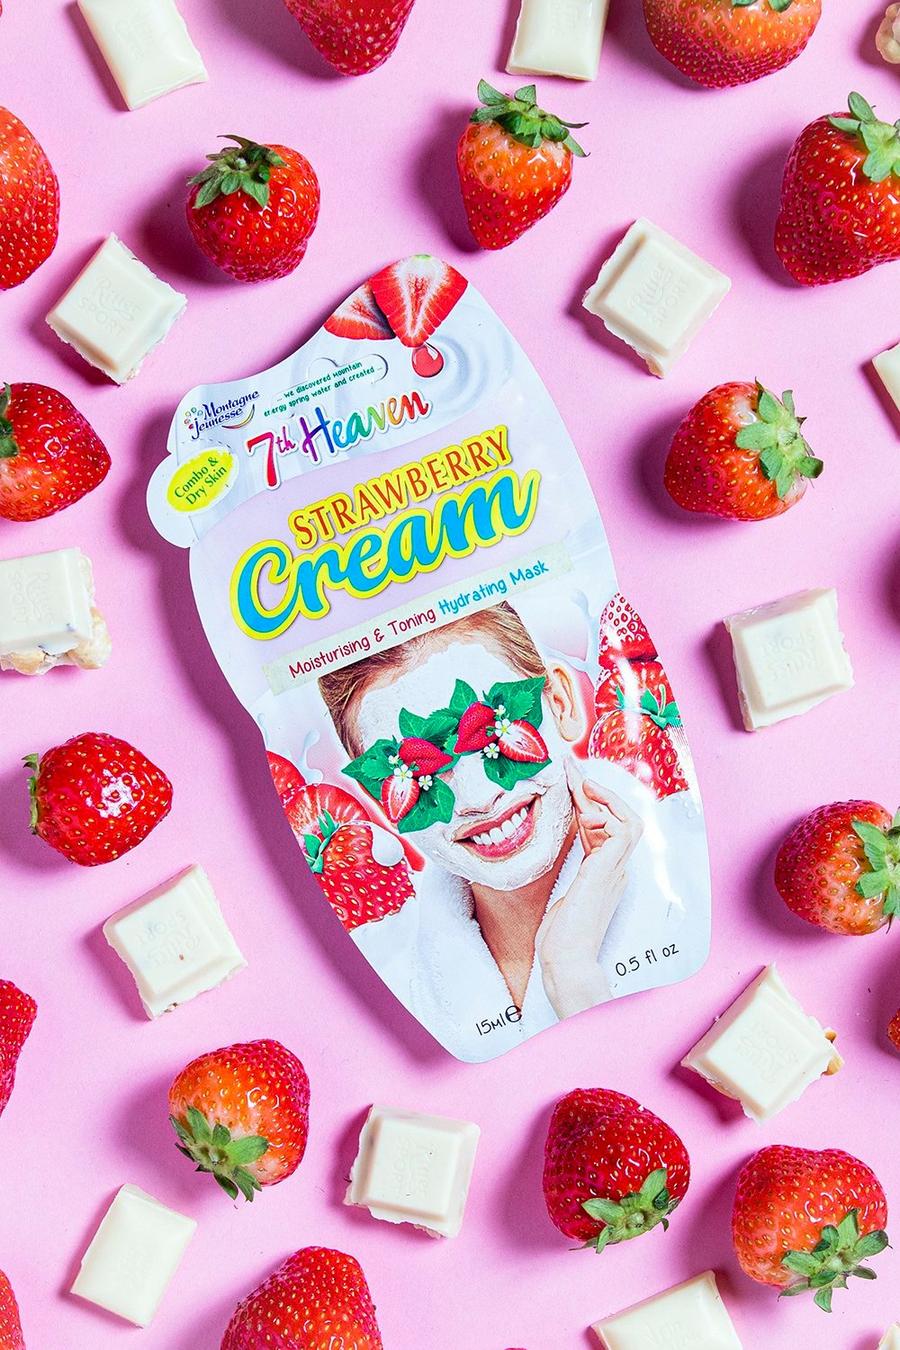 Pink 7TH HEAVEN STRAWBERRY CREAM FACE MASK